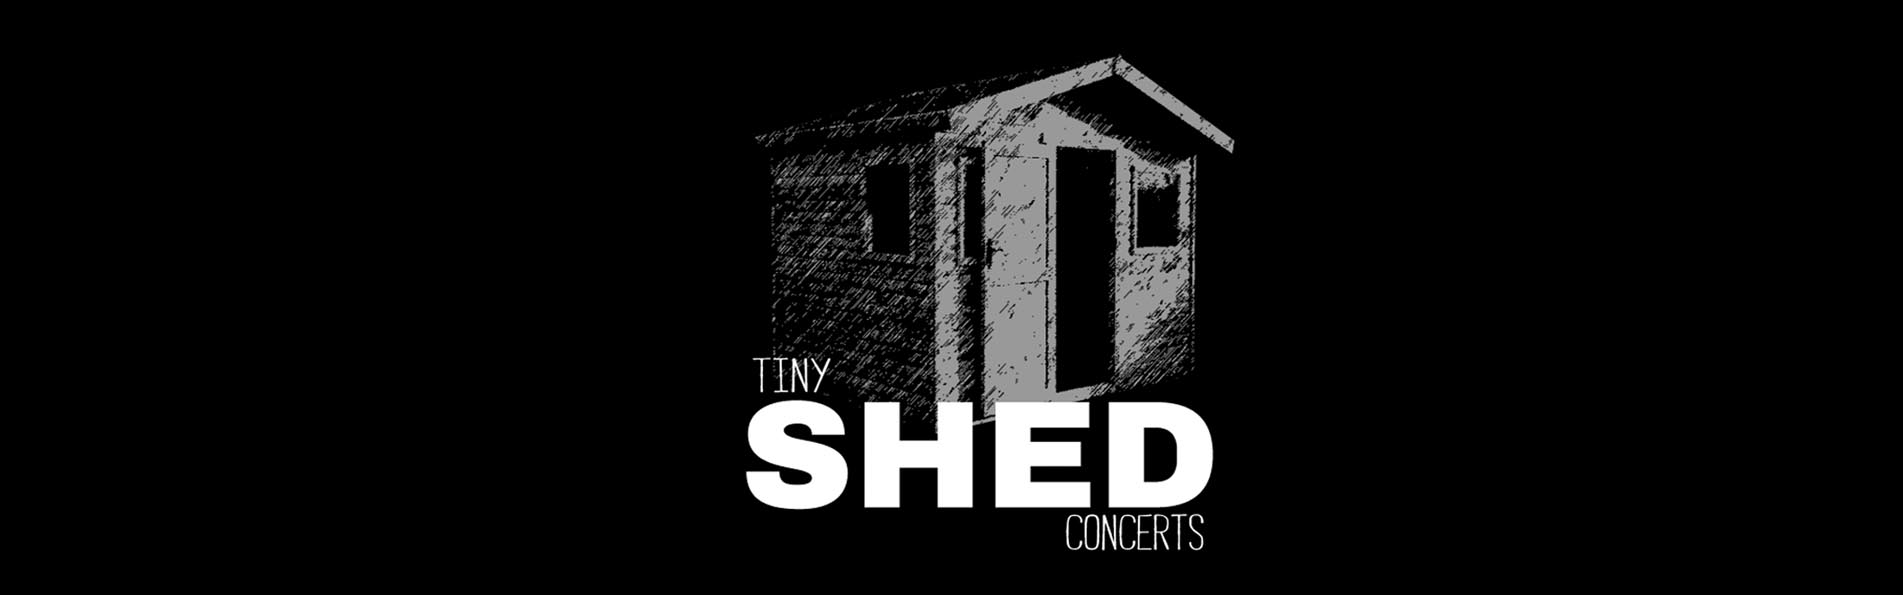 tiny shed concerts